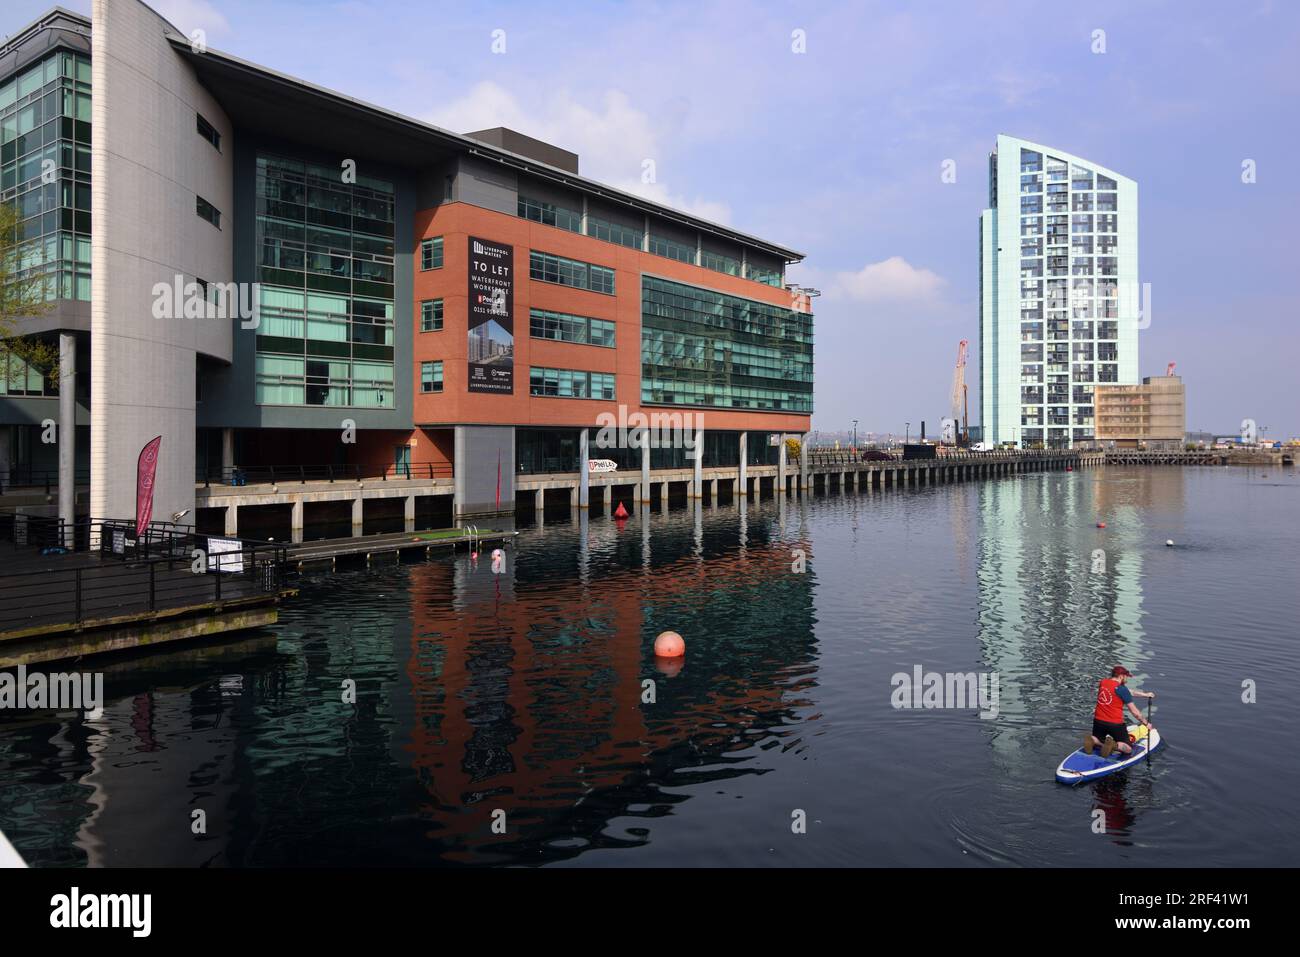 Paddleboarder Paddleboarding in the Prince's Dock with Alexandra Tower (2005-2008) Skyscraper in the Background Liverpool UK Stock Photo